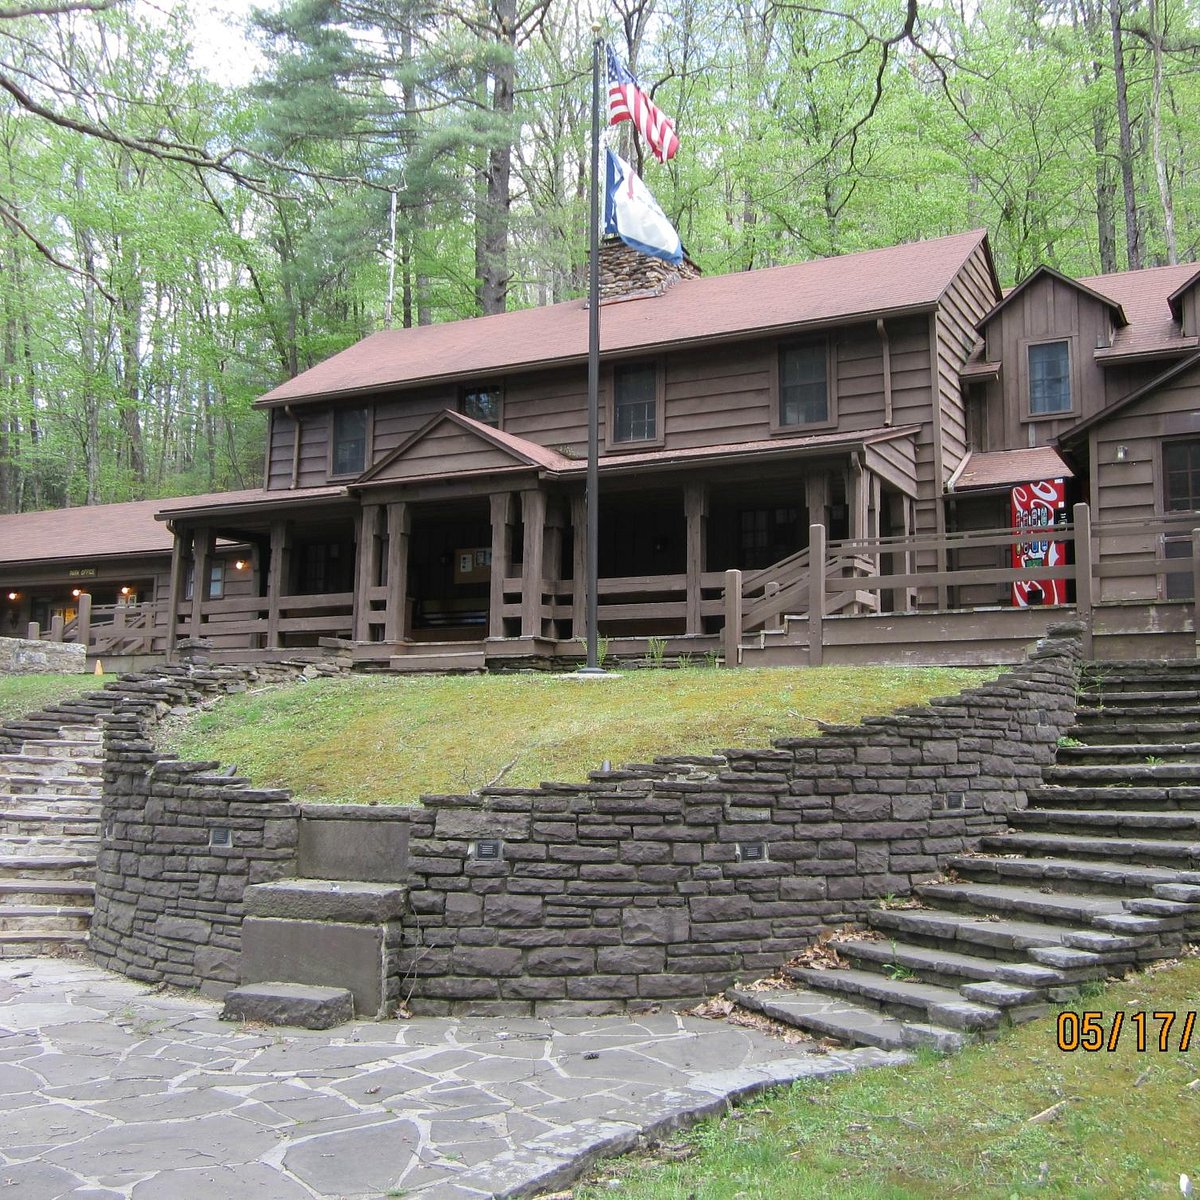 are dogs allowed in cabins in west virginia state parks